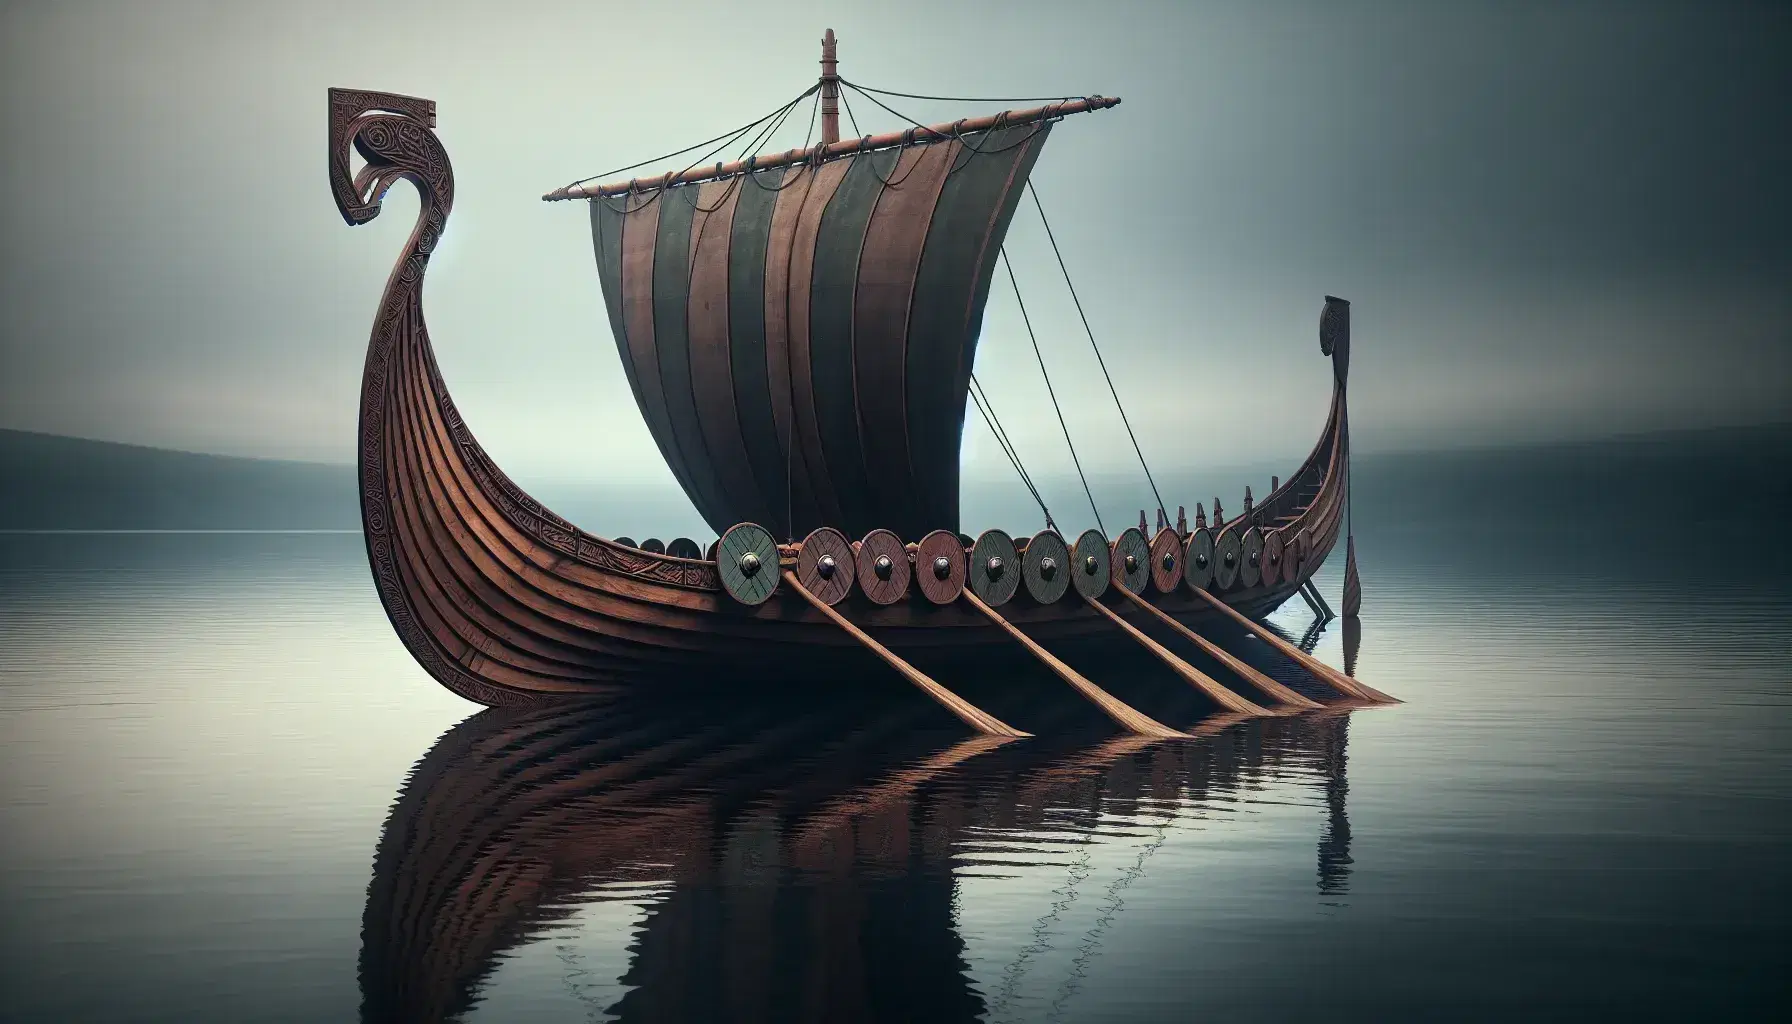 Viking longship on calm water with reflective surface, featuring carved dragon heads, hanging shields, and a furled striped sail, surrounded by a group in period attire.